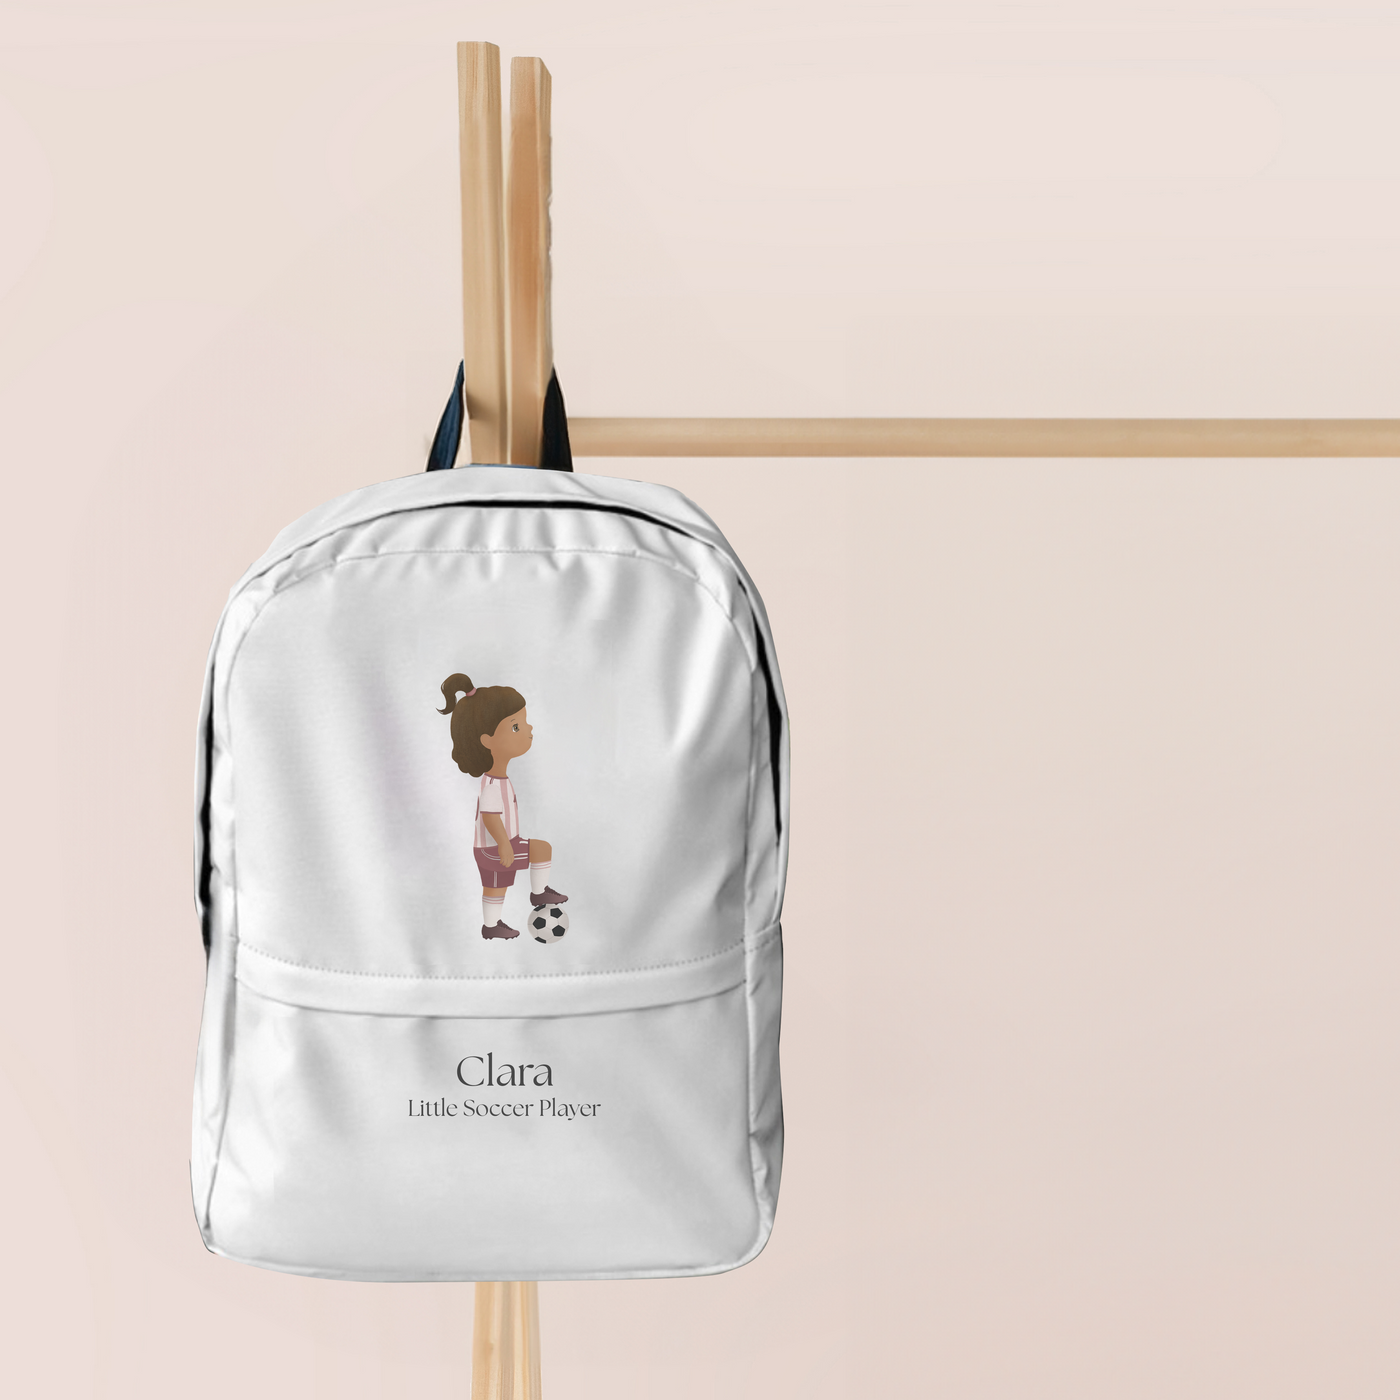 Little Soccer Player Girl Personalized Backpack